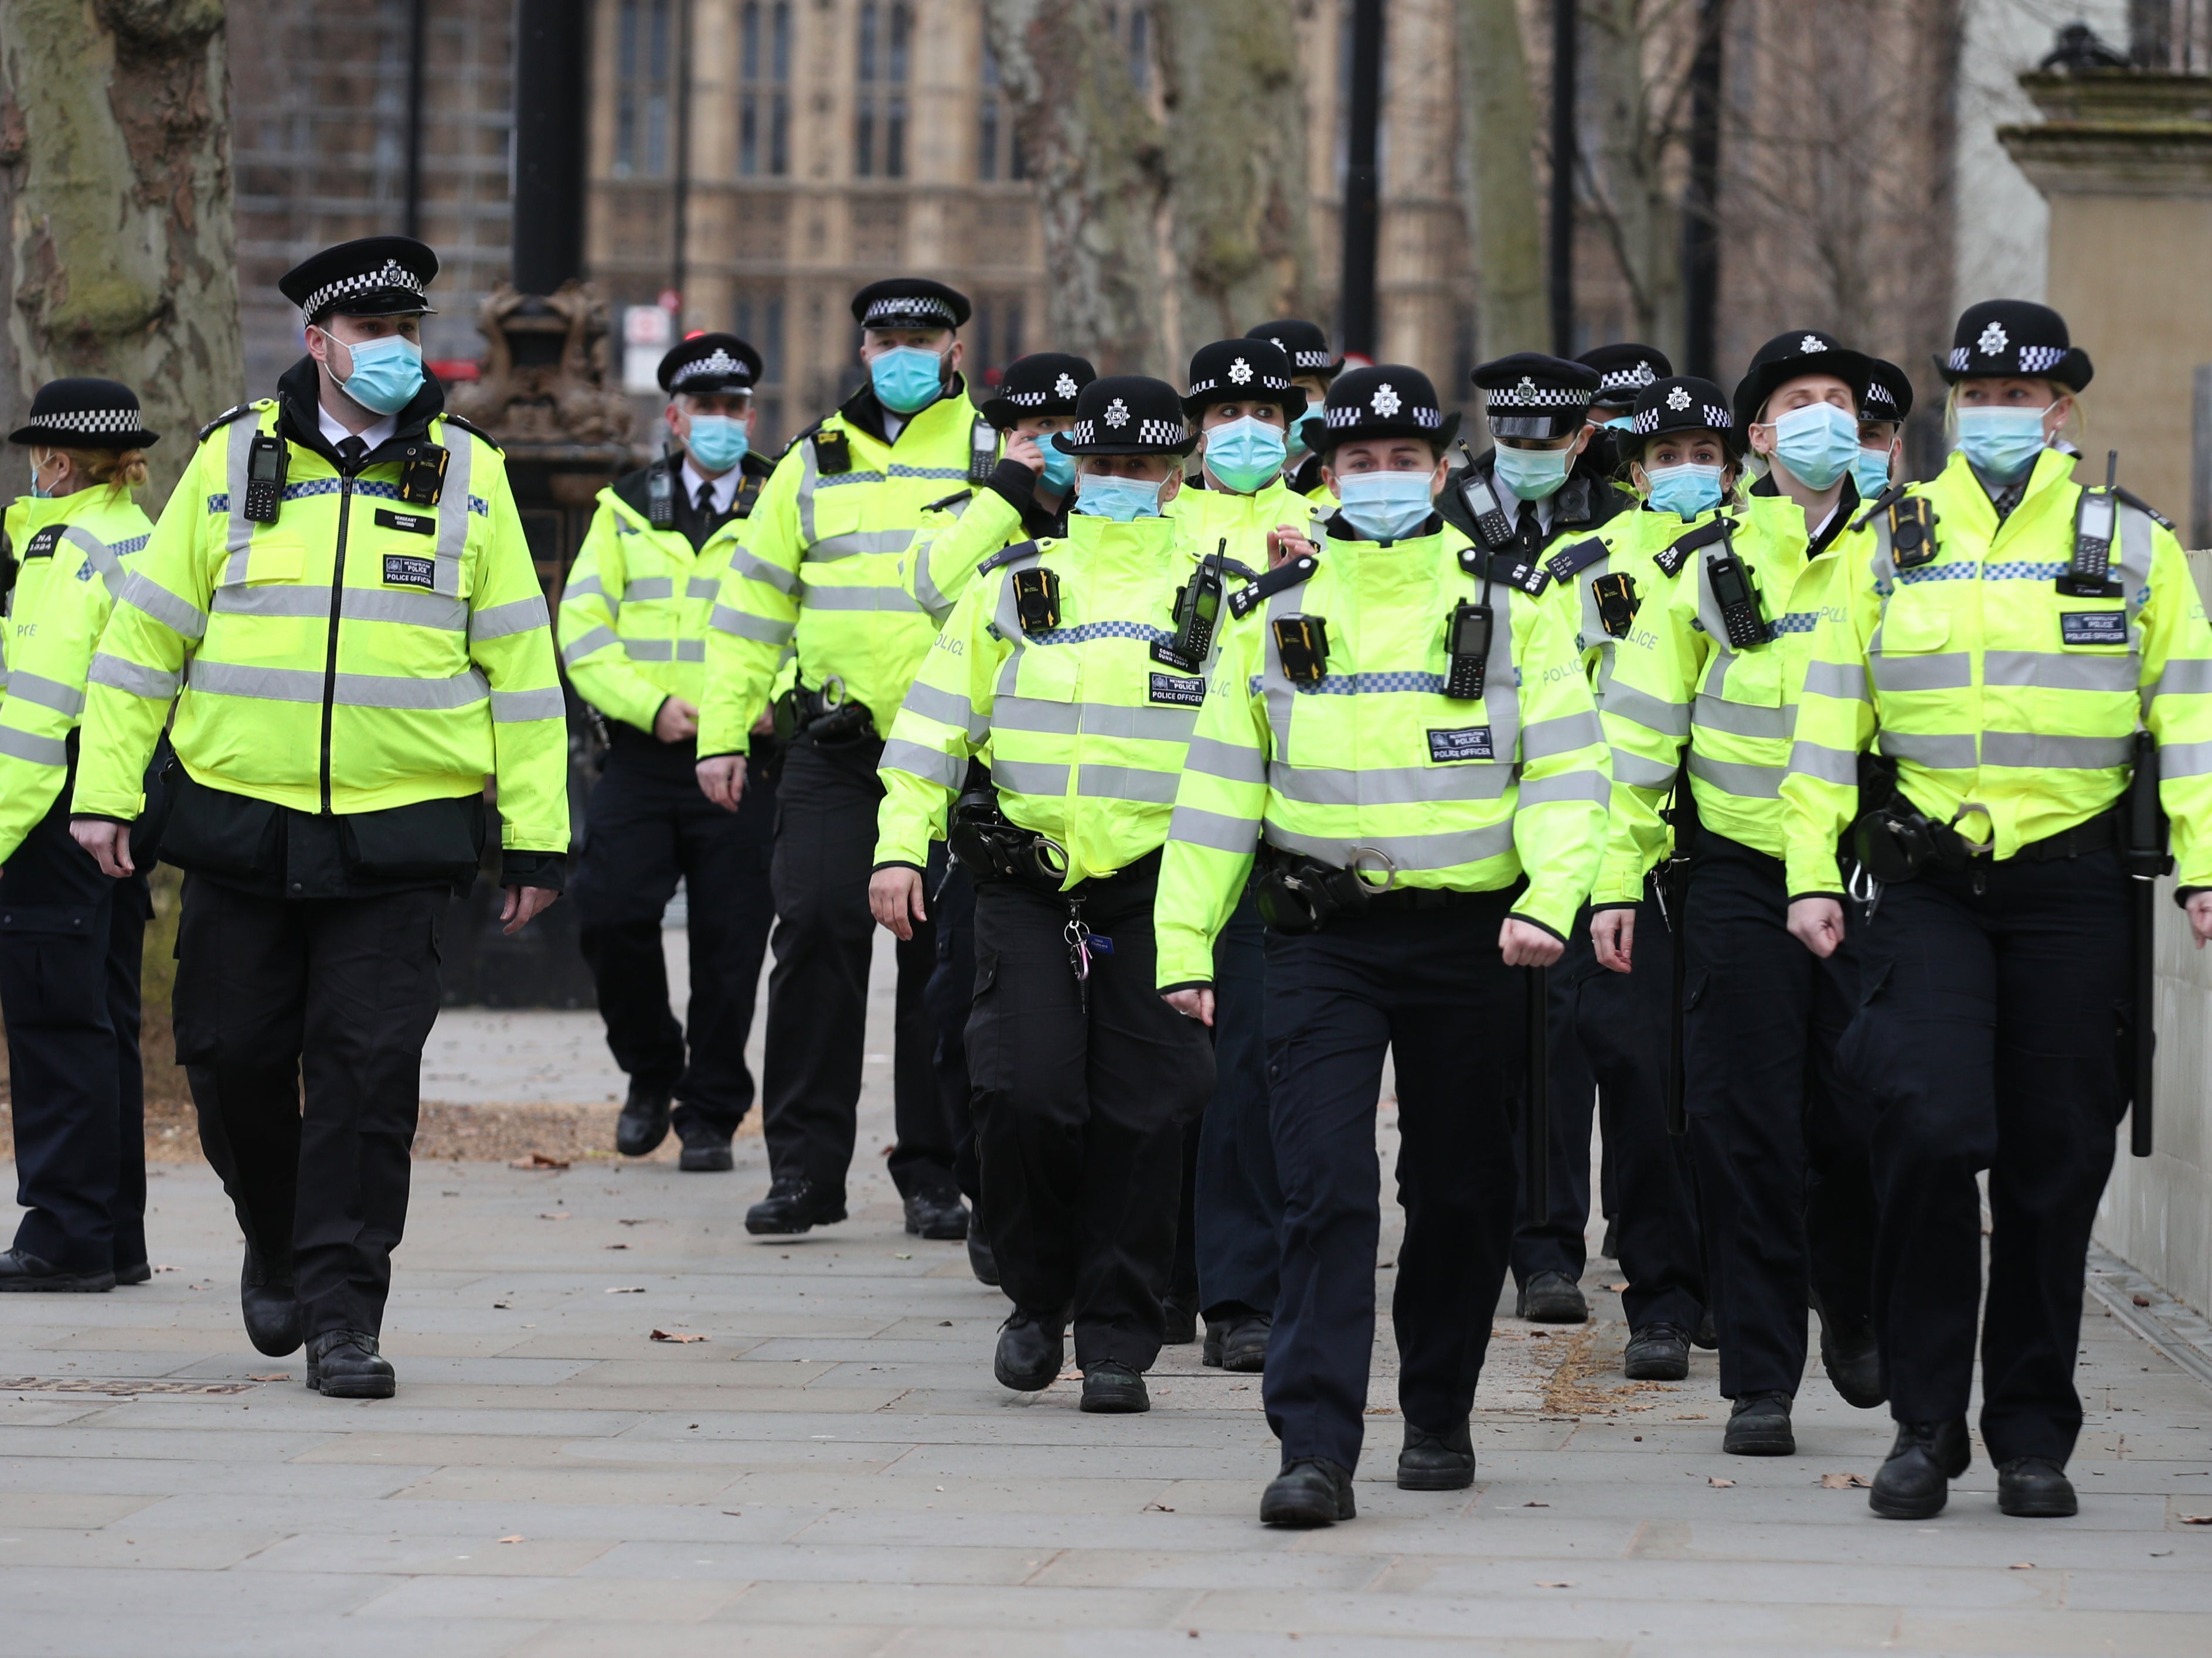 Officers patrol outside New Scotland Yard in London as members of the public gathered for a protest following clashes between police and crowds at a vigil for Sarah Everard on Clapham Common